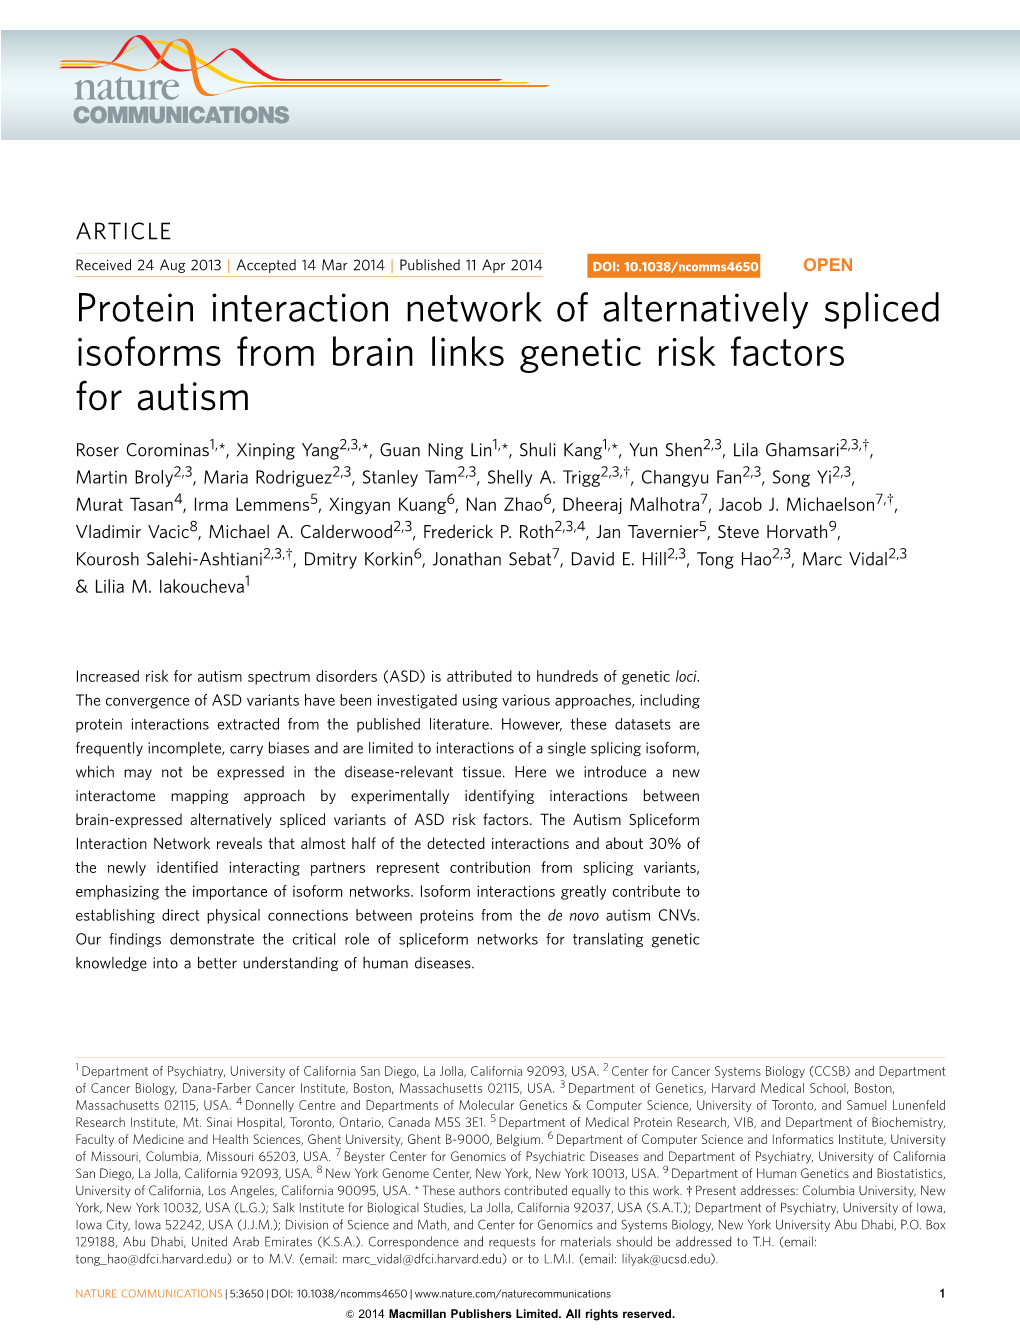 Protein Interaction Network of Alternatively Spliced Isoforms from Brain Links Genetic Risk Factors for Autism